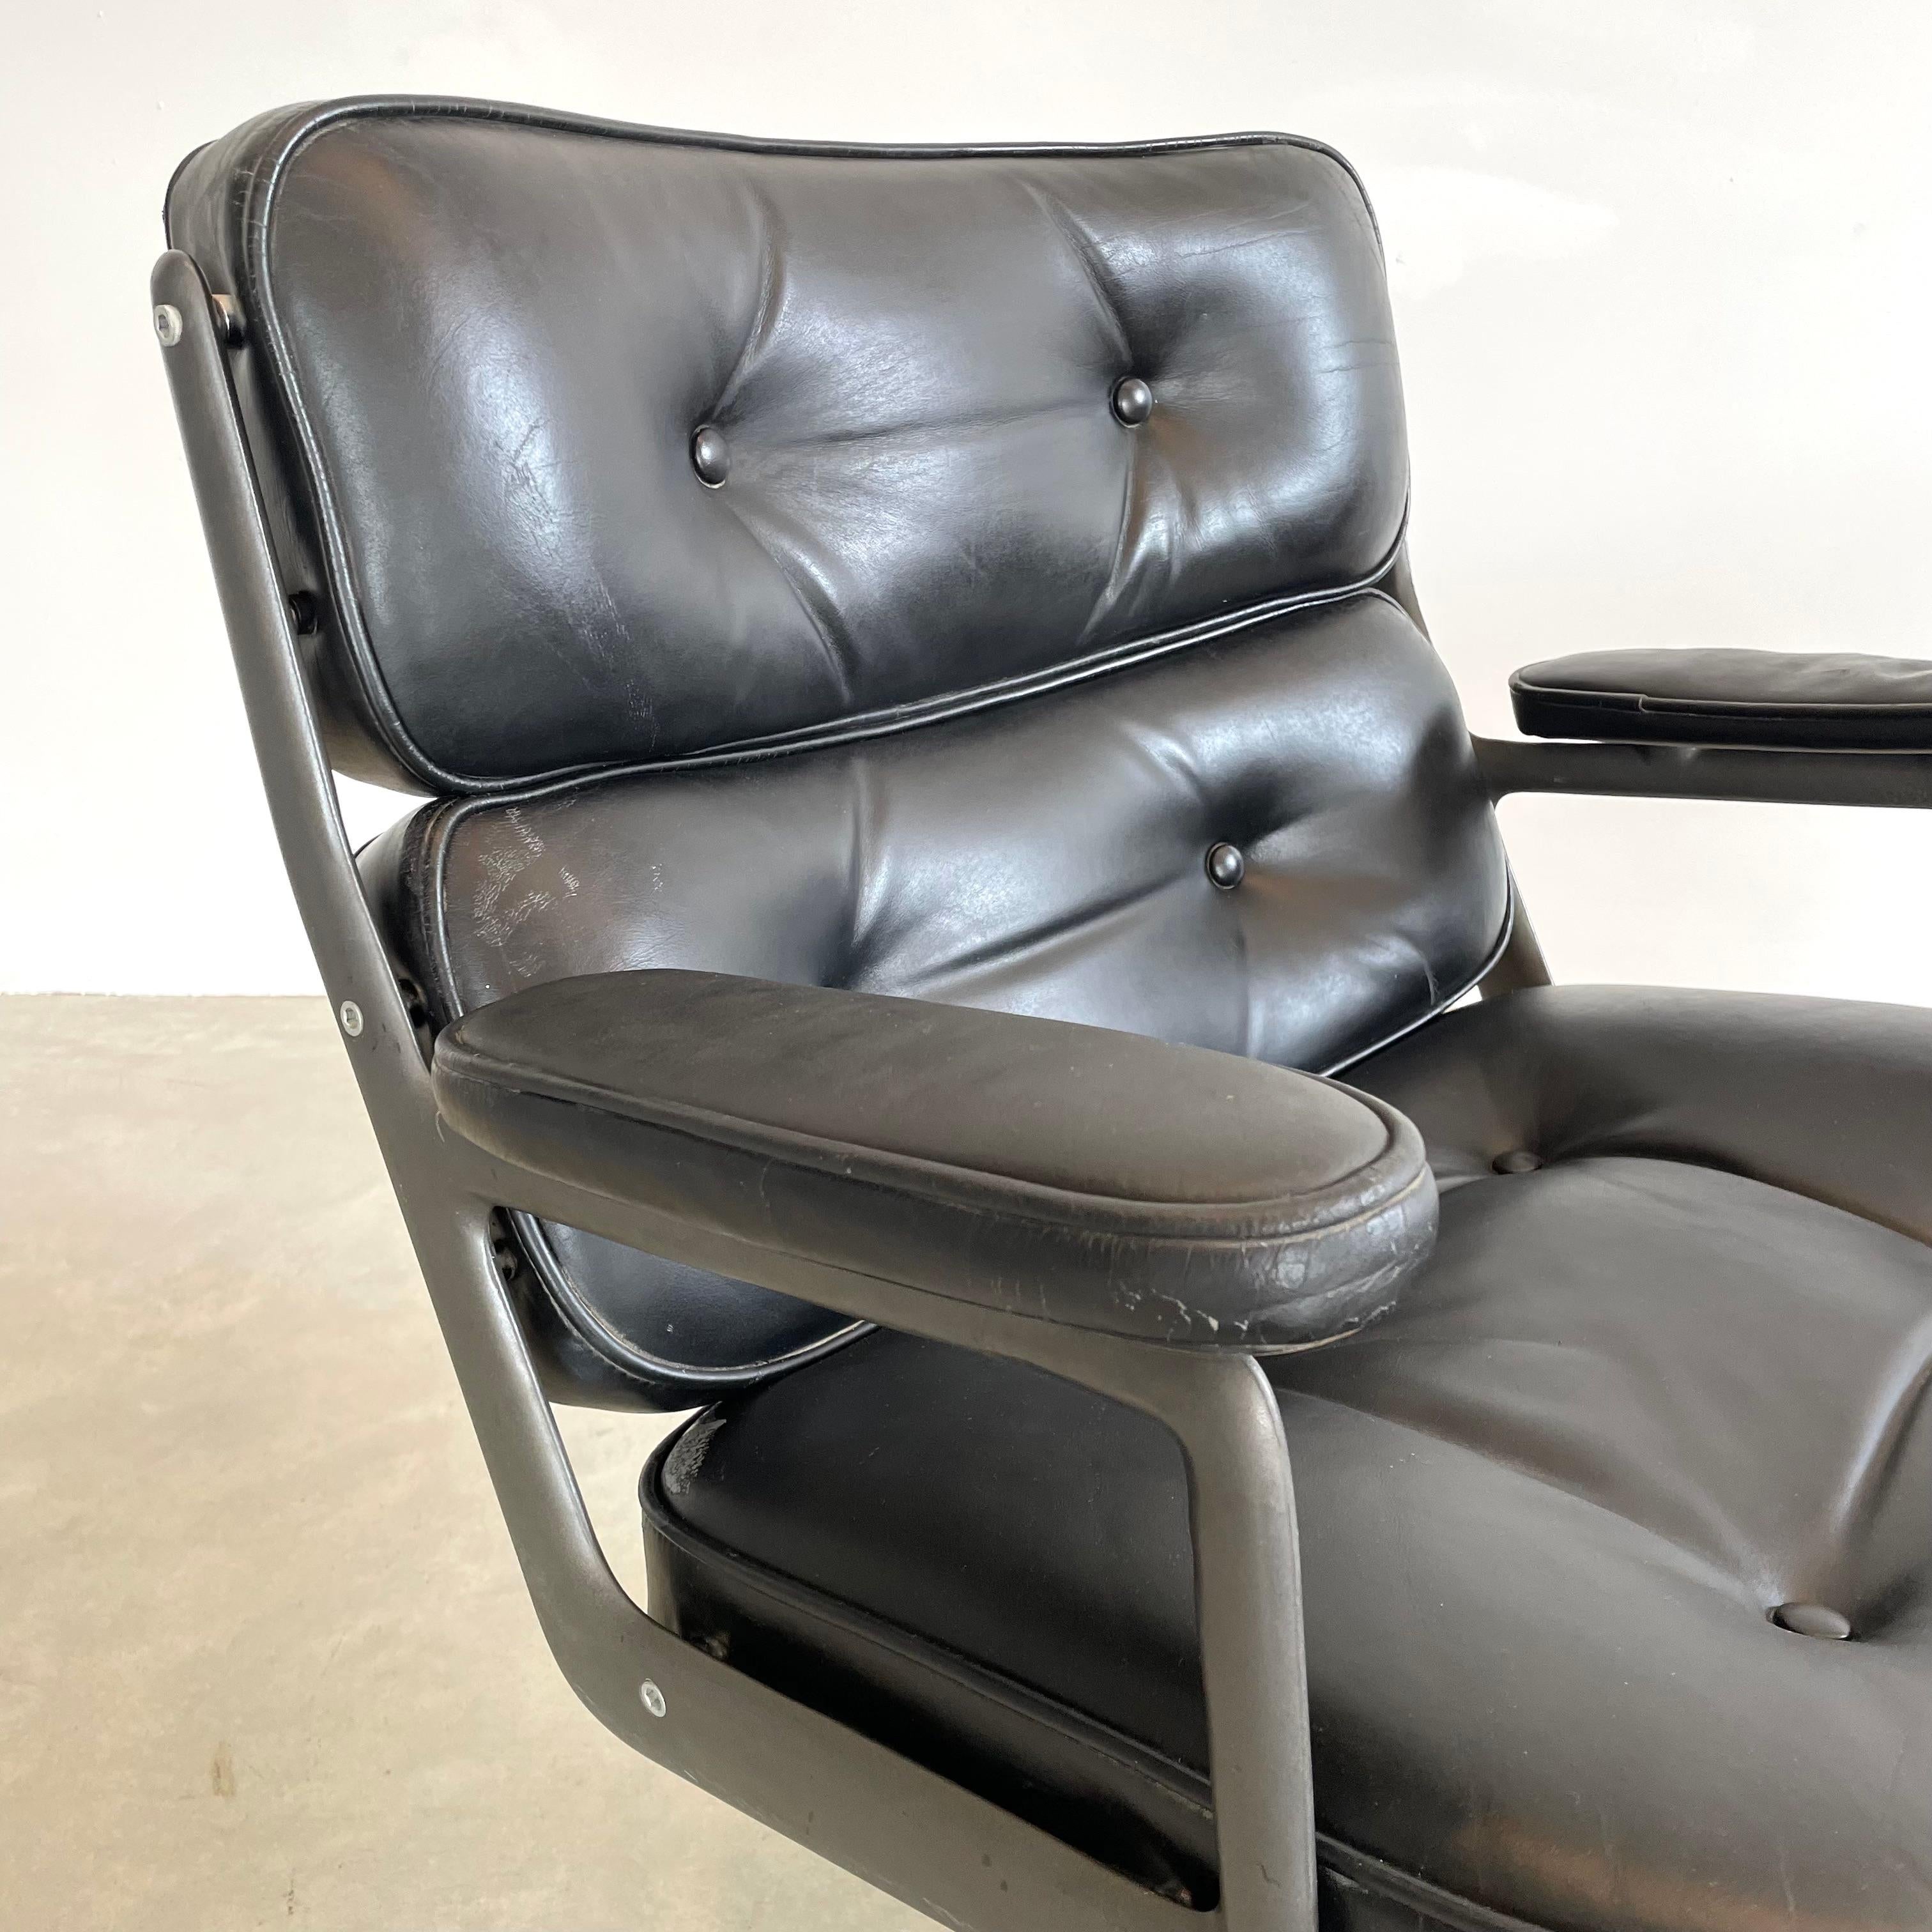 Eames Time Life Lobby Lounge Chair in Black Leather for Herman Miller, 1980s USA For Sale 6